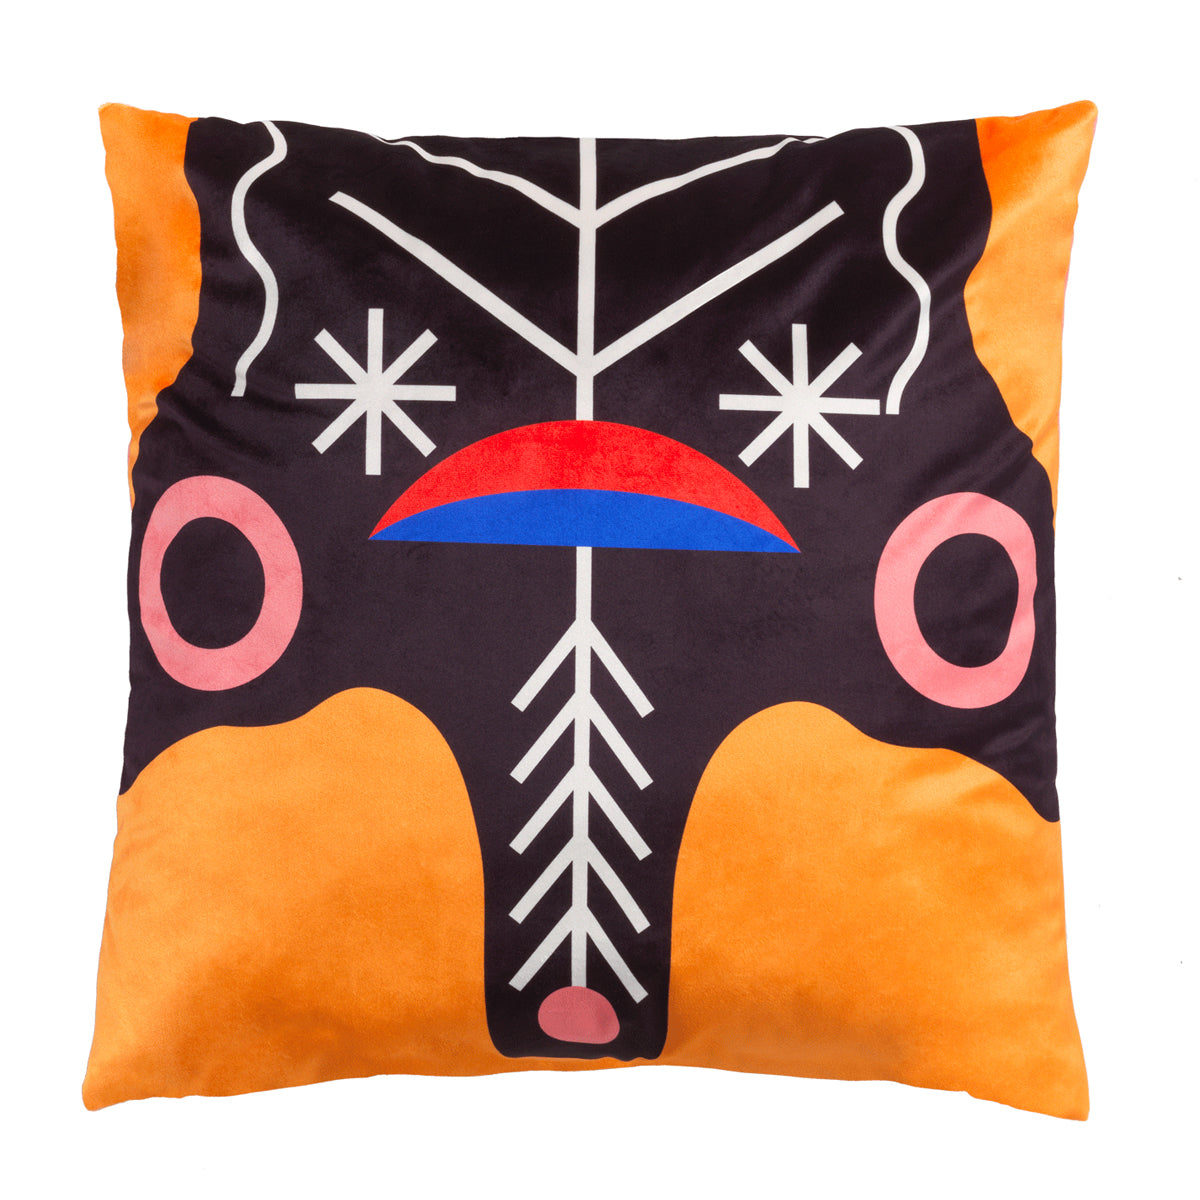 Oggian Kinotto Cushion Cover by Marco Oggian